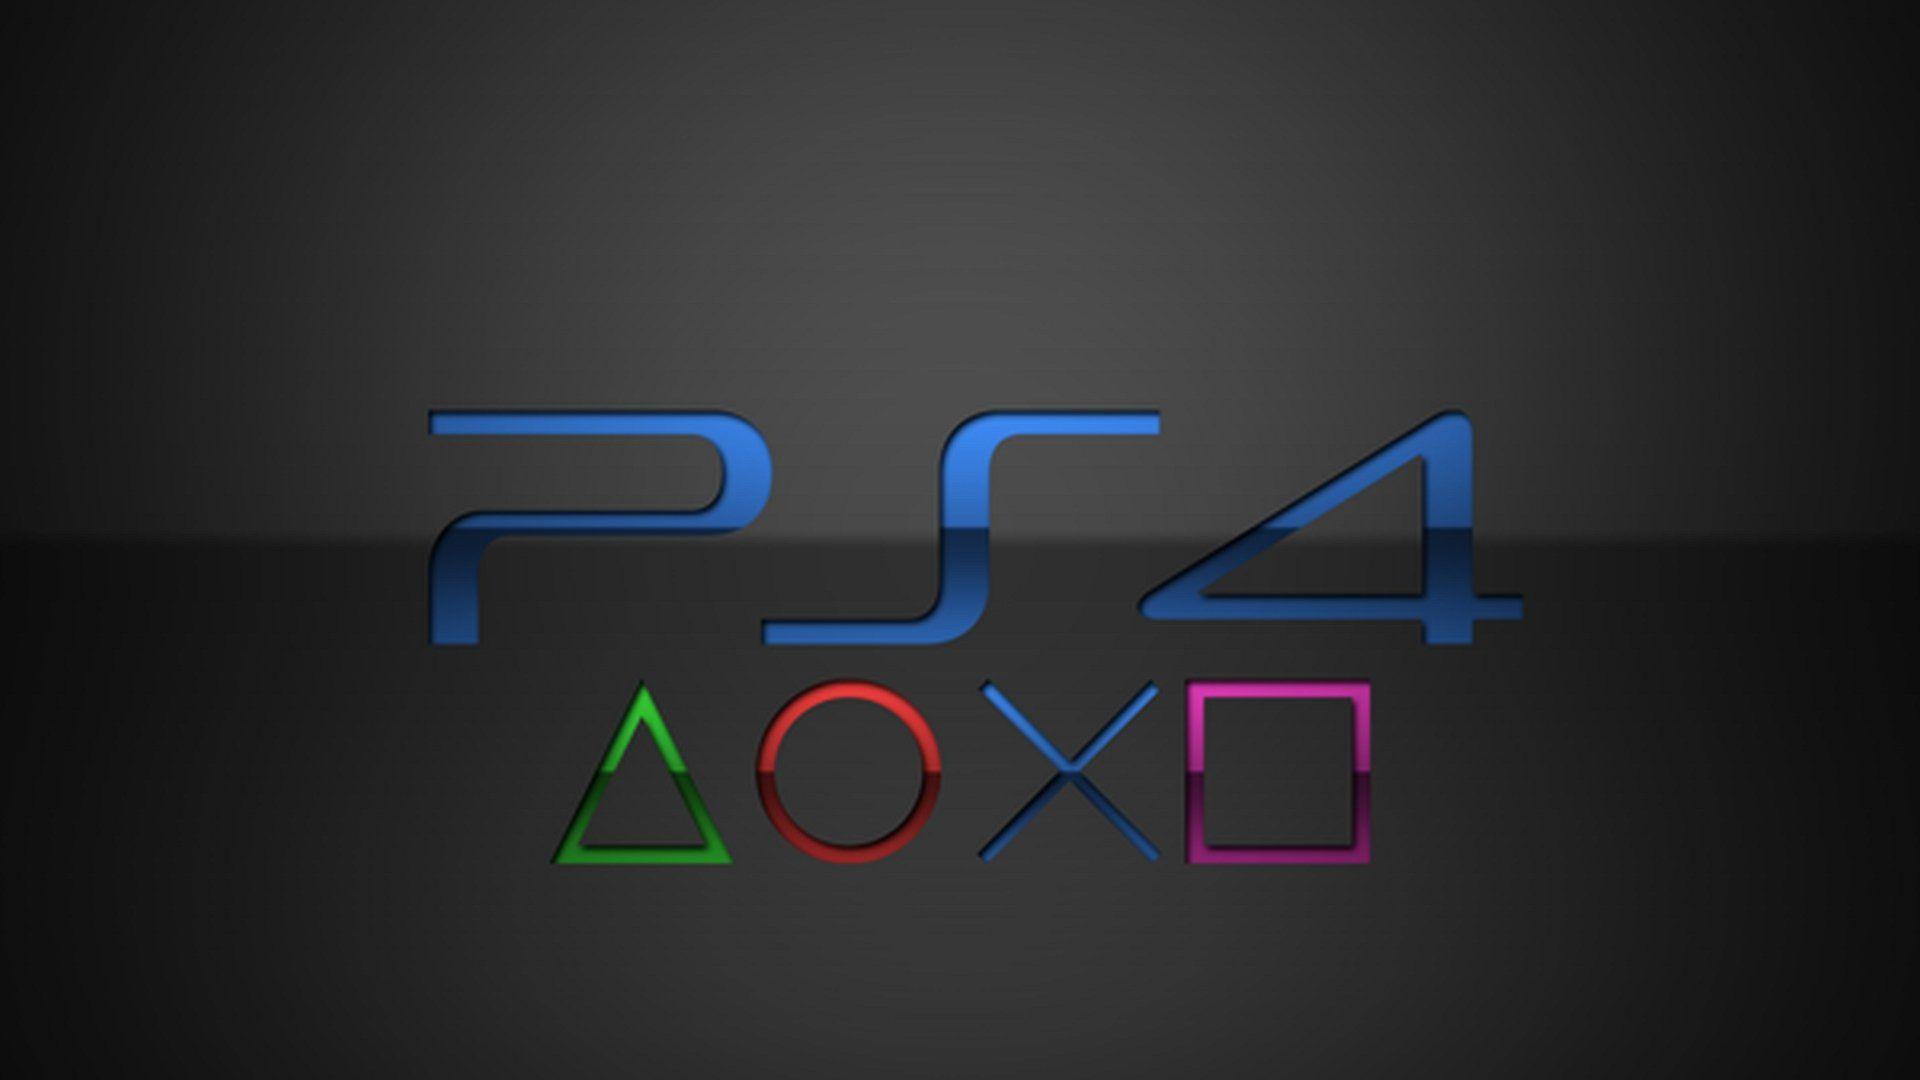 PS4 Playstation videogame system video game sony wallpaper